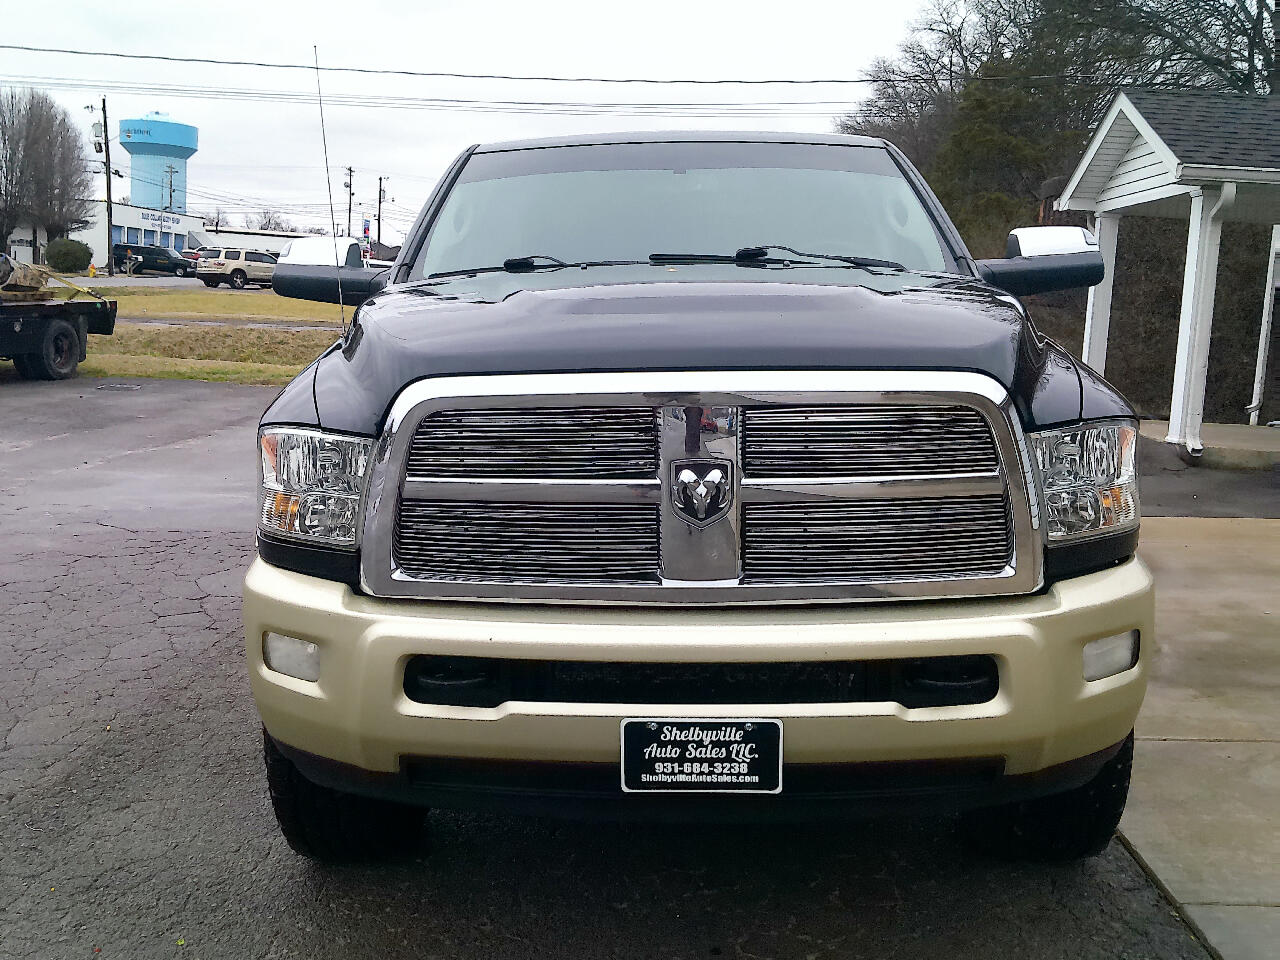 2012 RAM 2500 NICE TRUCK4WDLEATHER SUNROOFHEATED AND COOLED SEATS HEATED STEERING WHE